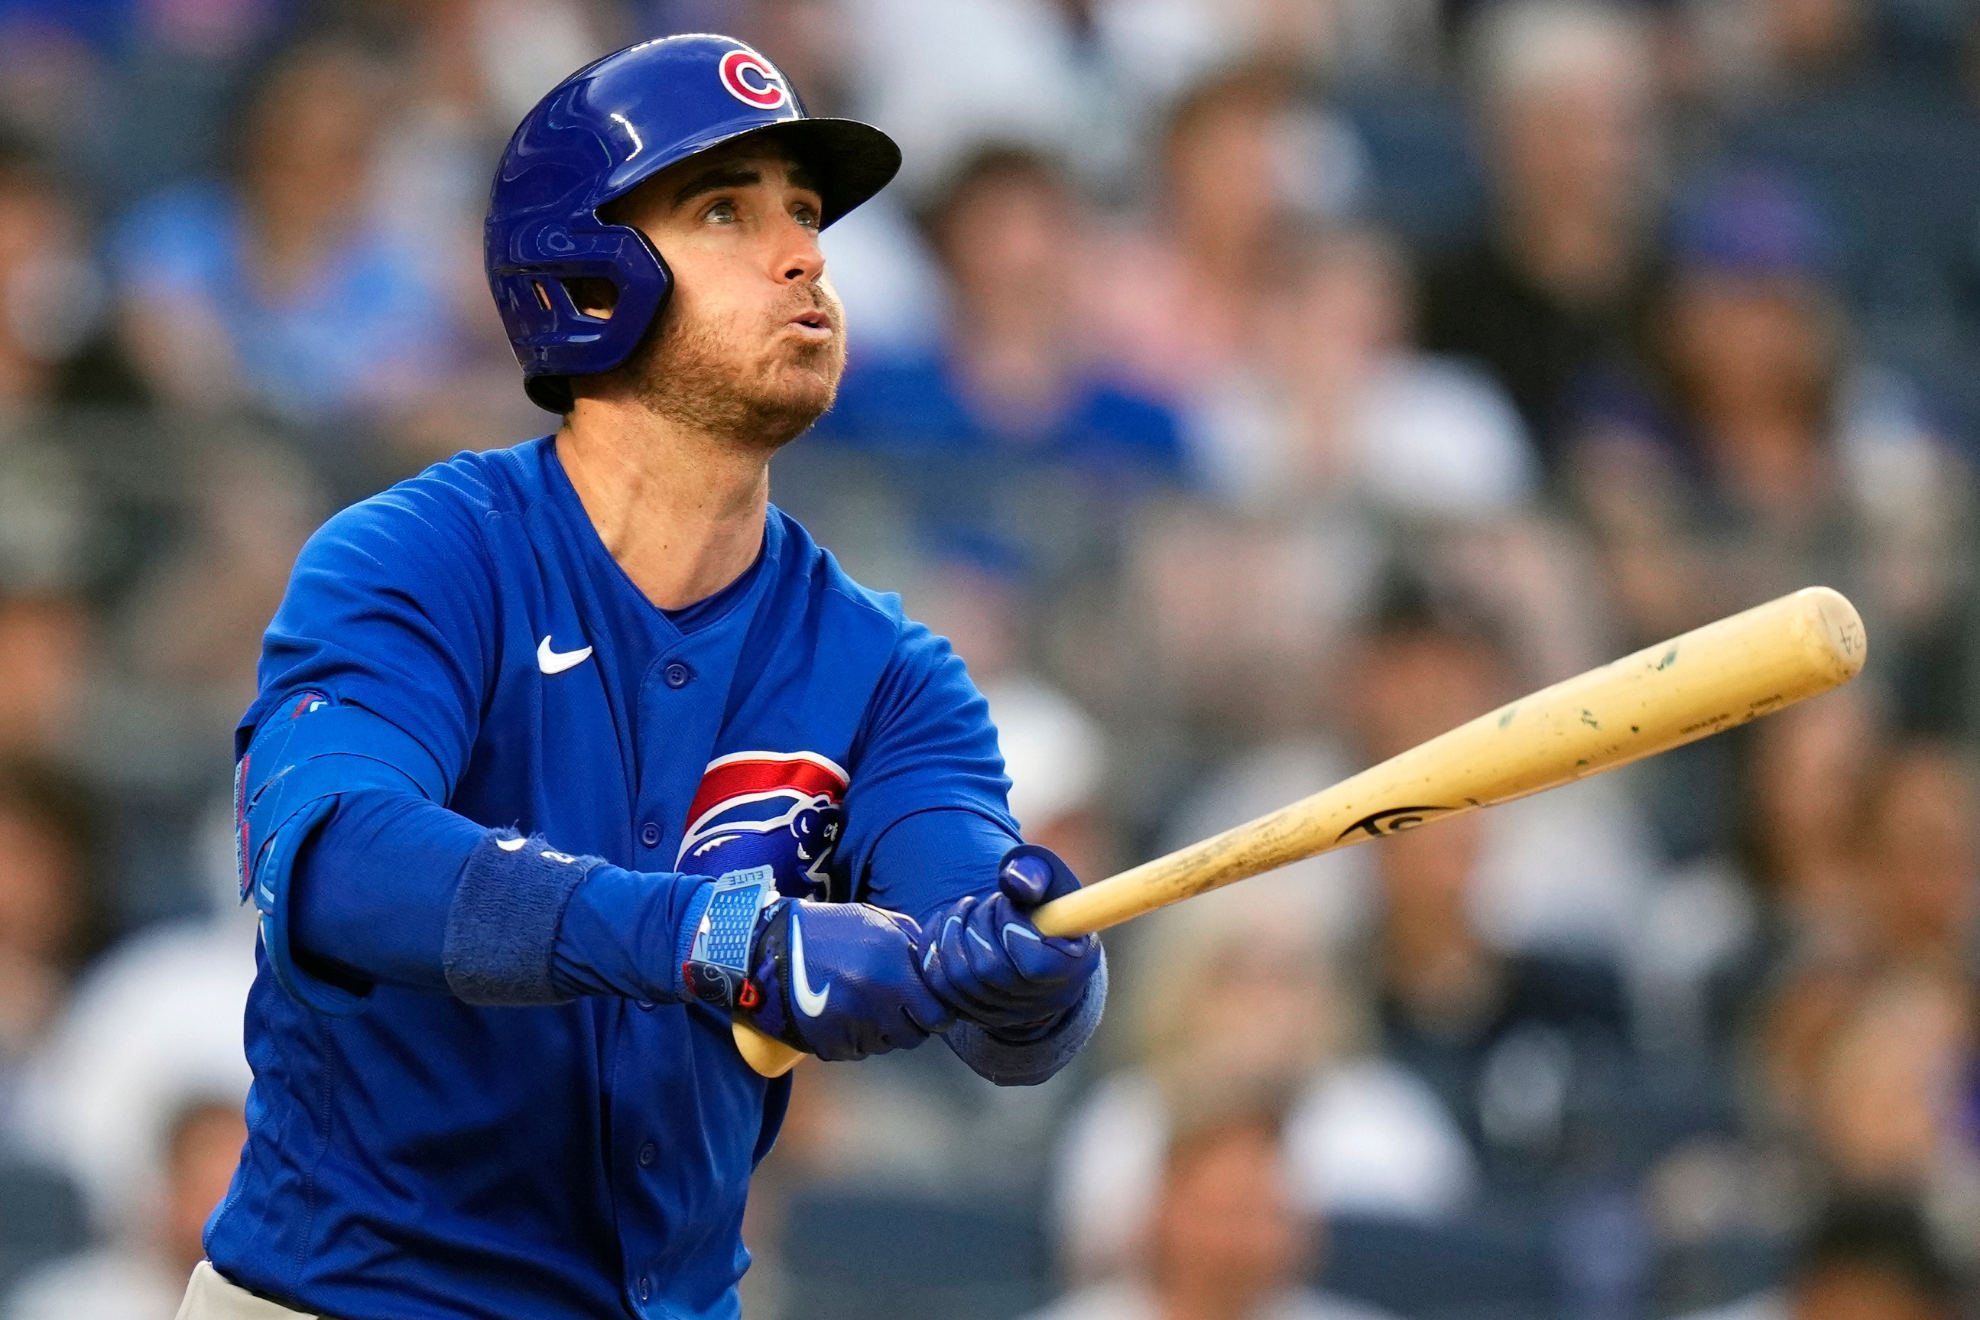 Cody Bellinger could return to the Chicago Cubs.